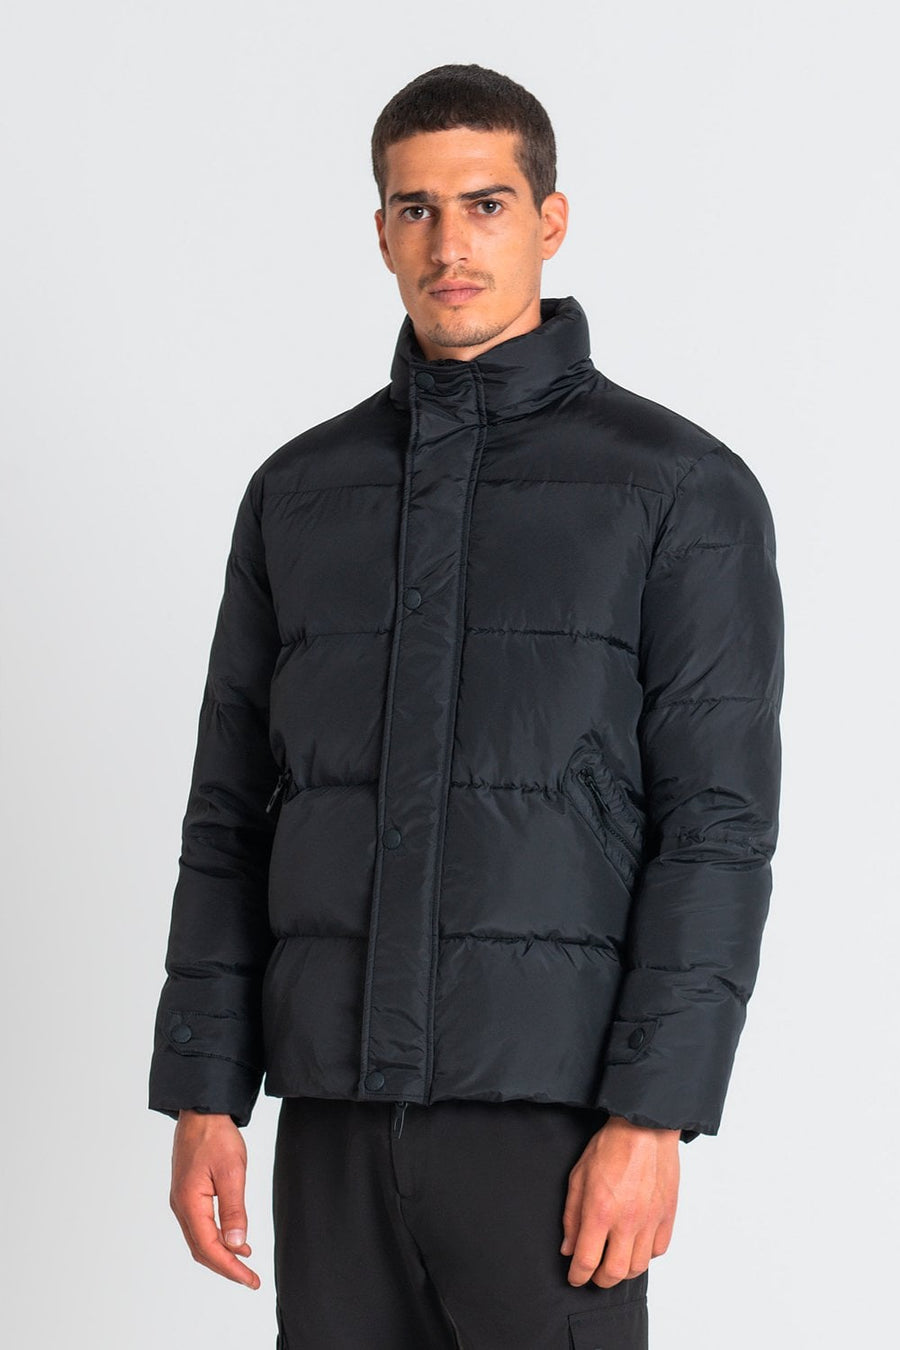 Buy the Antony Morato 3/4 Quilted Tech Jacket in Black at Intro. Spend £50 for free UK delivery. Official stockists. We ship worldwide.